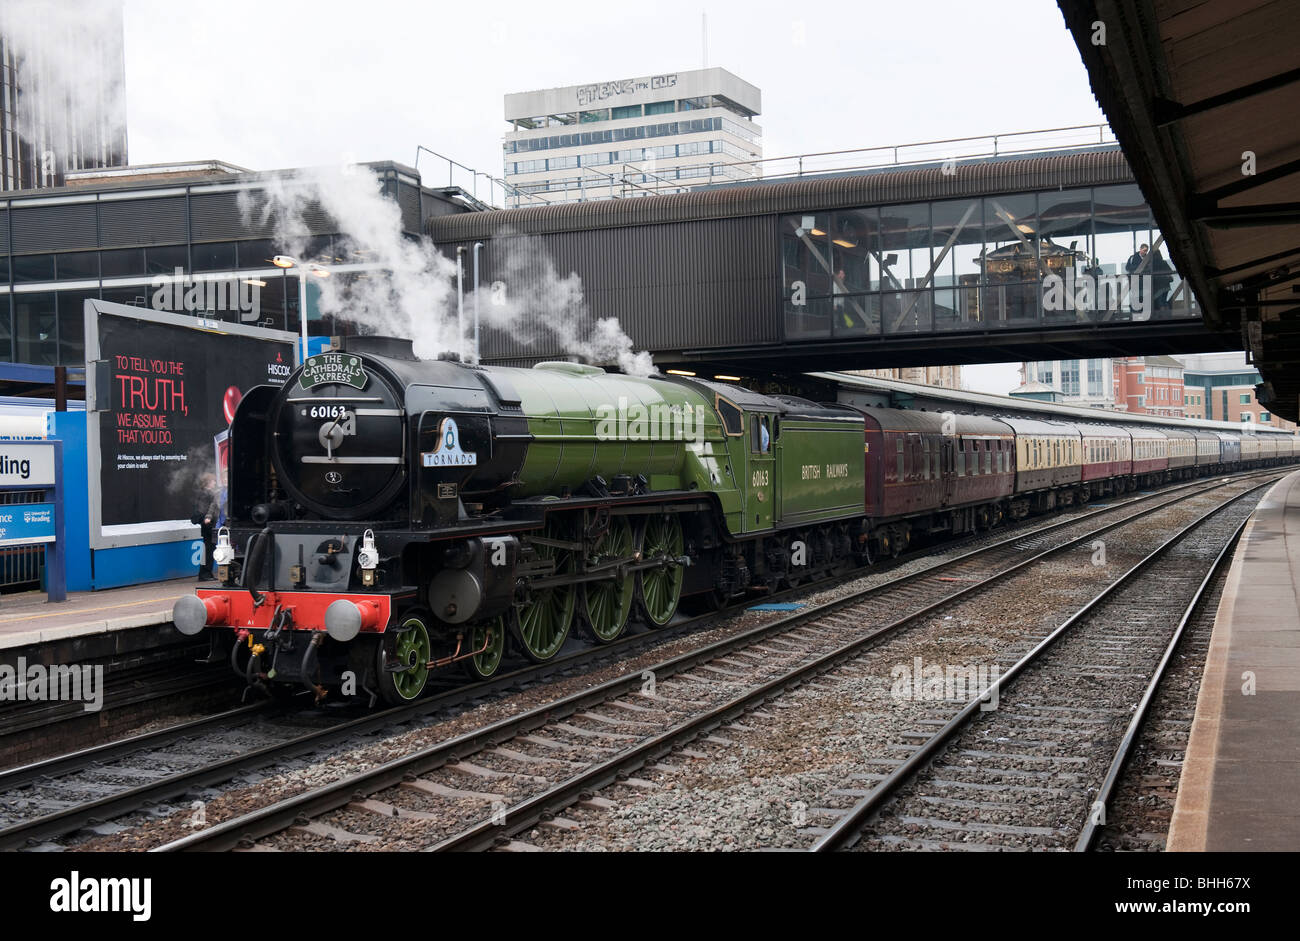 A1 Pacific Steam Locomotive 'Tornado' 60163 Reading Station with Valentine's Day Cathedrals Express Steam Train UK - 1 Stock Photo